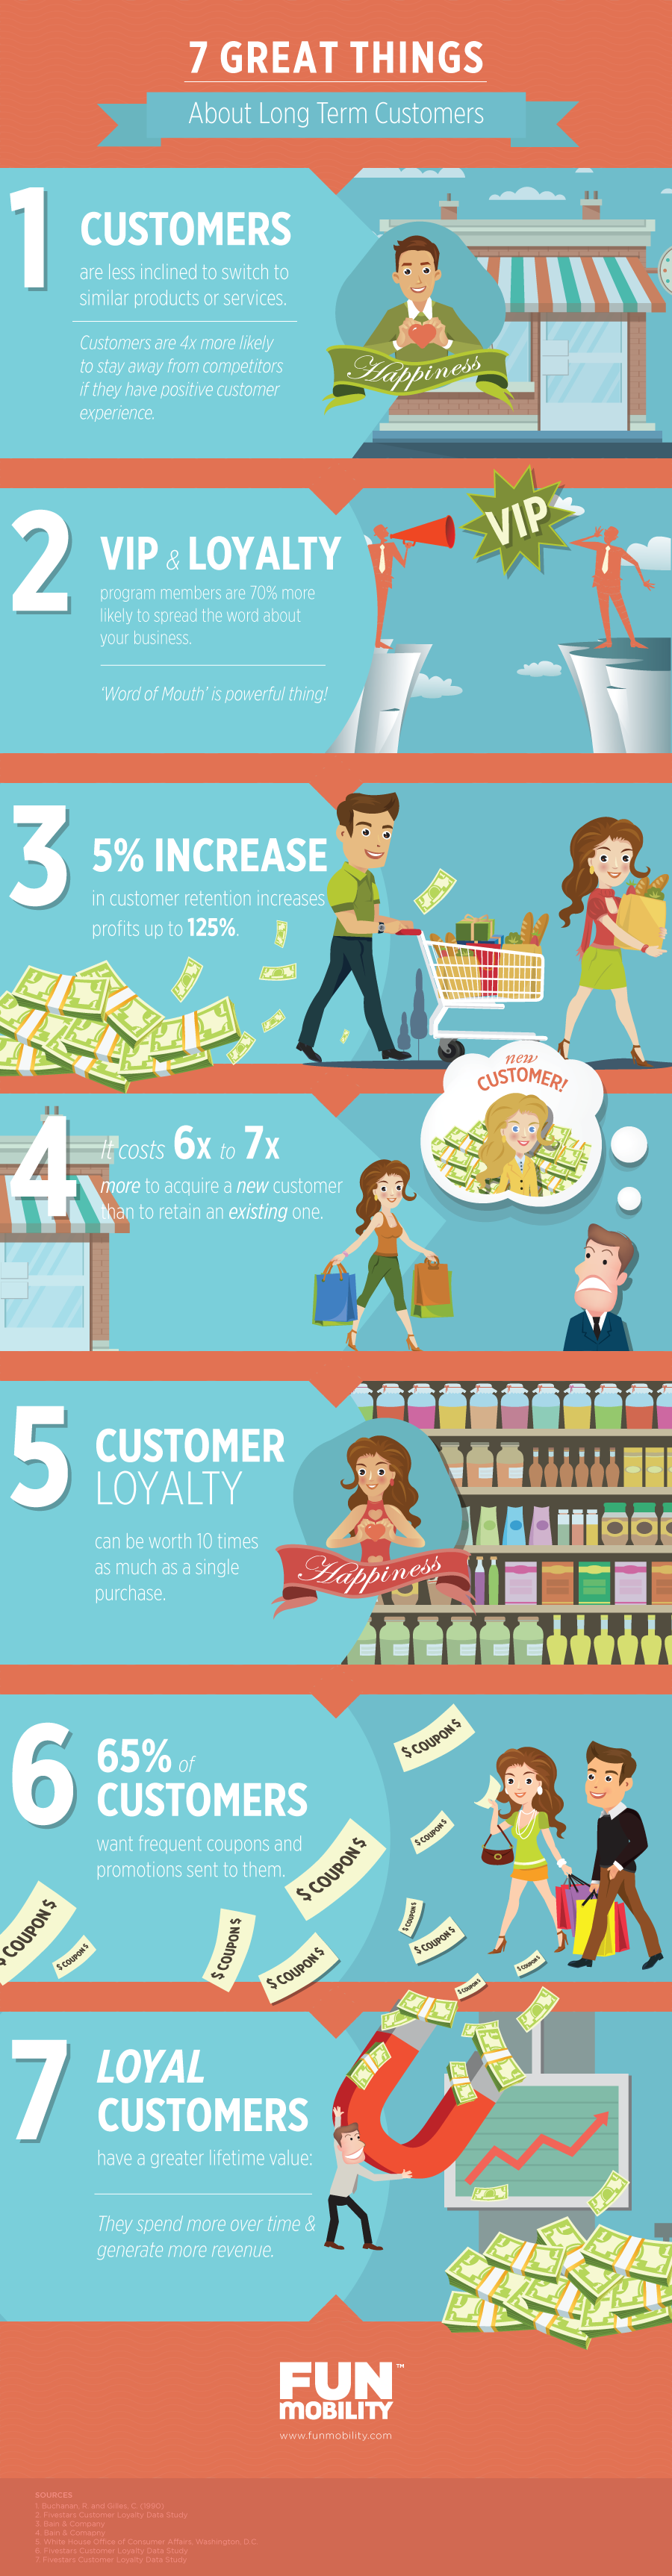 Infographic 7 great things about long term loyal customers